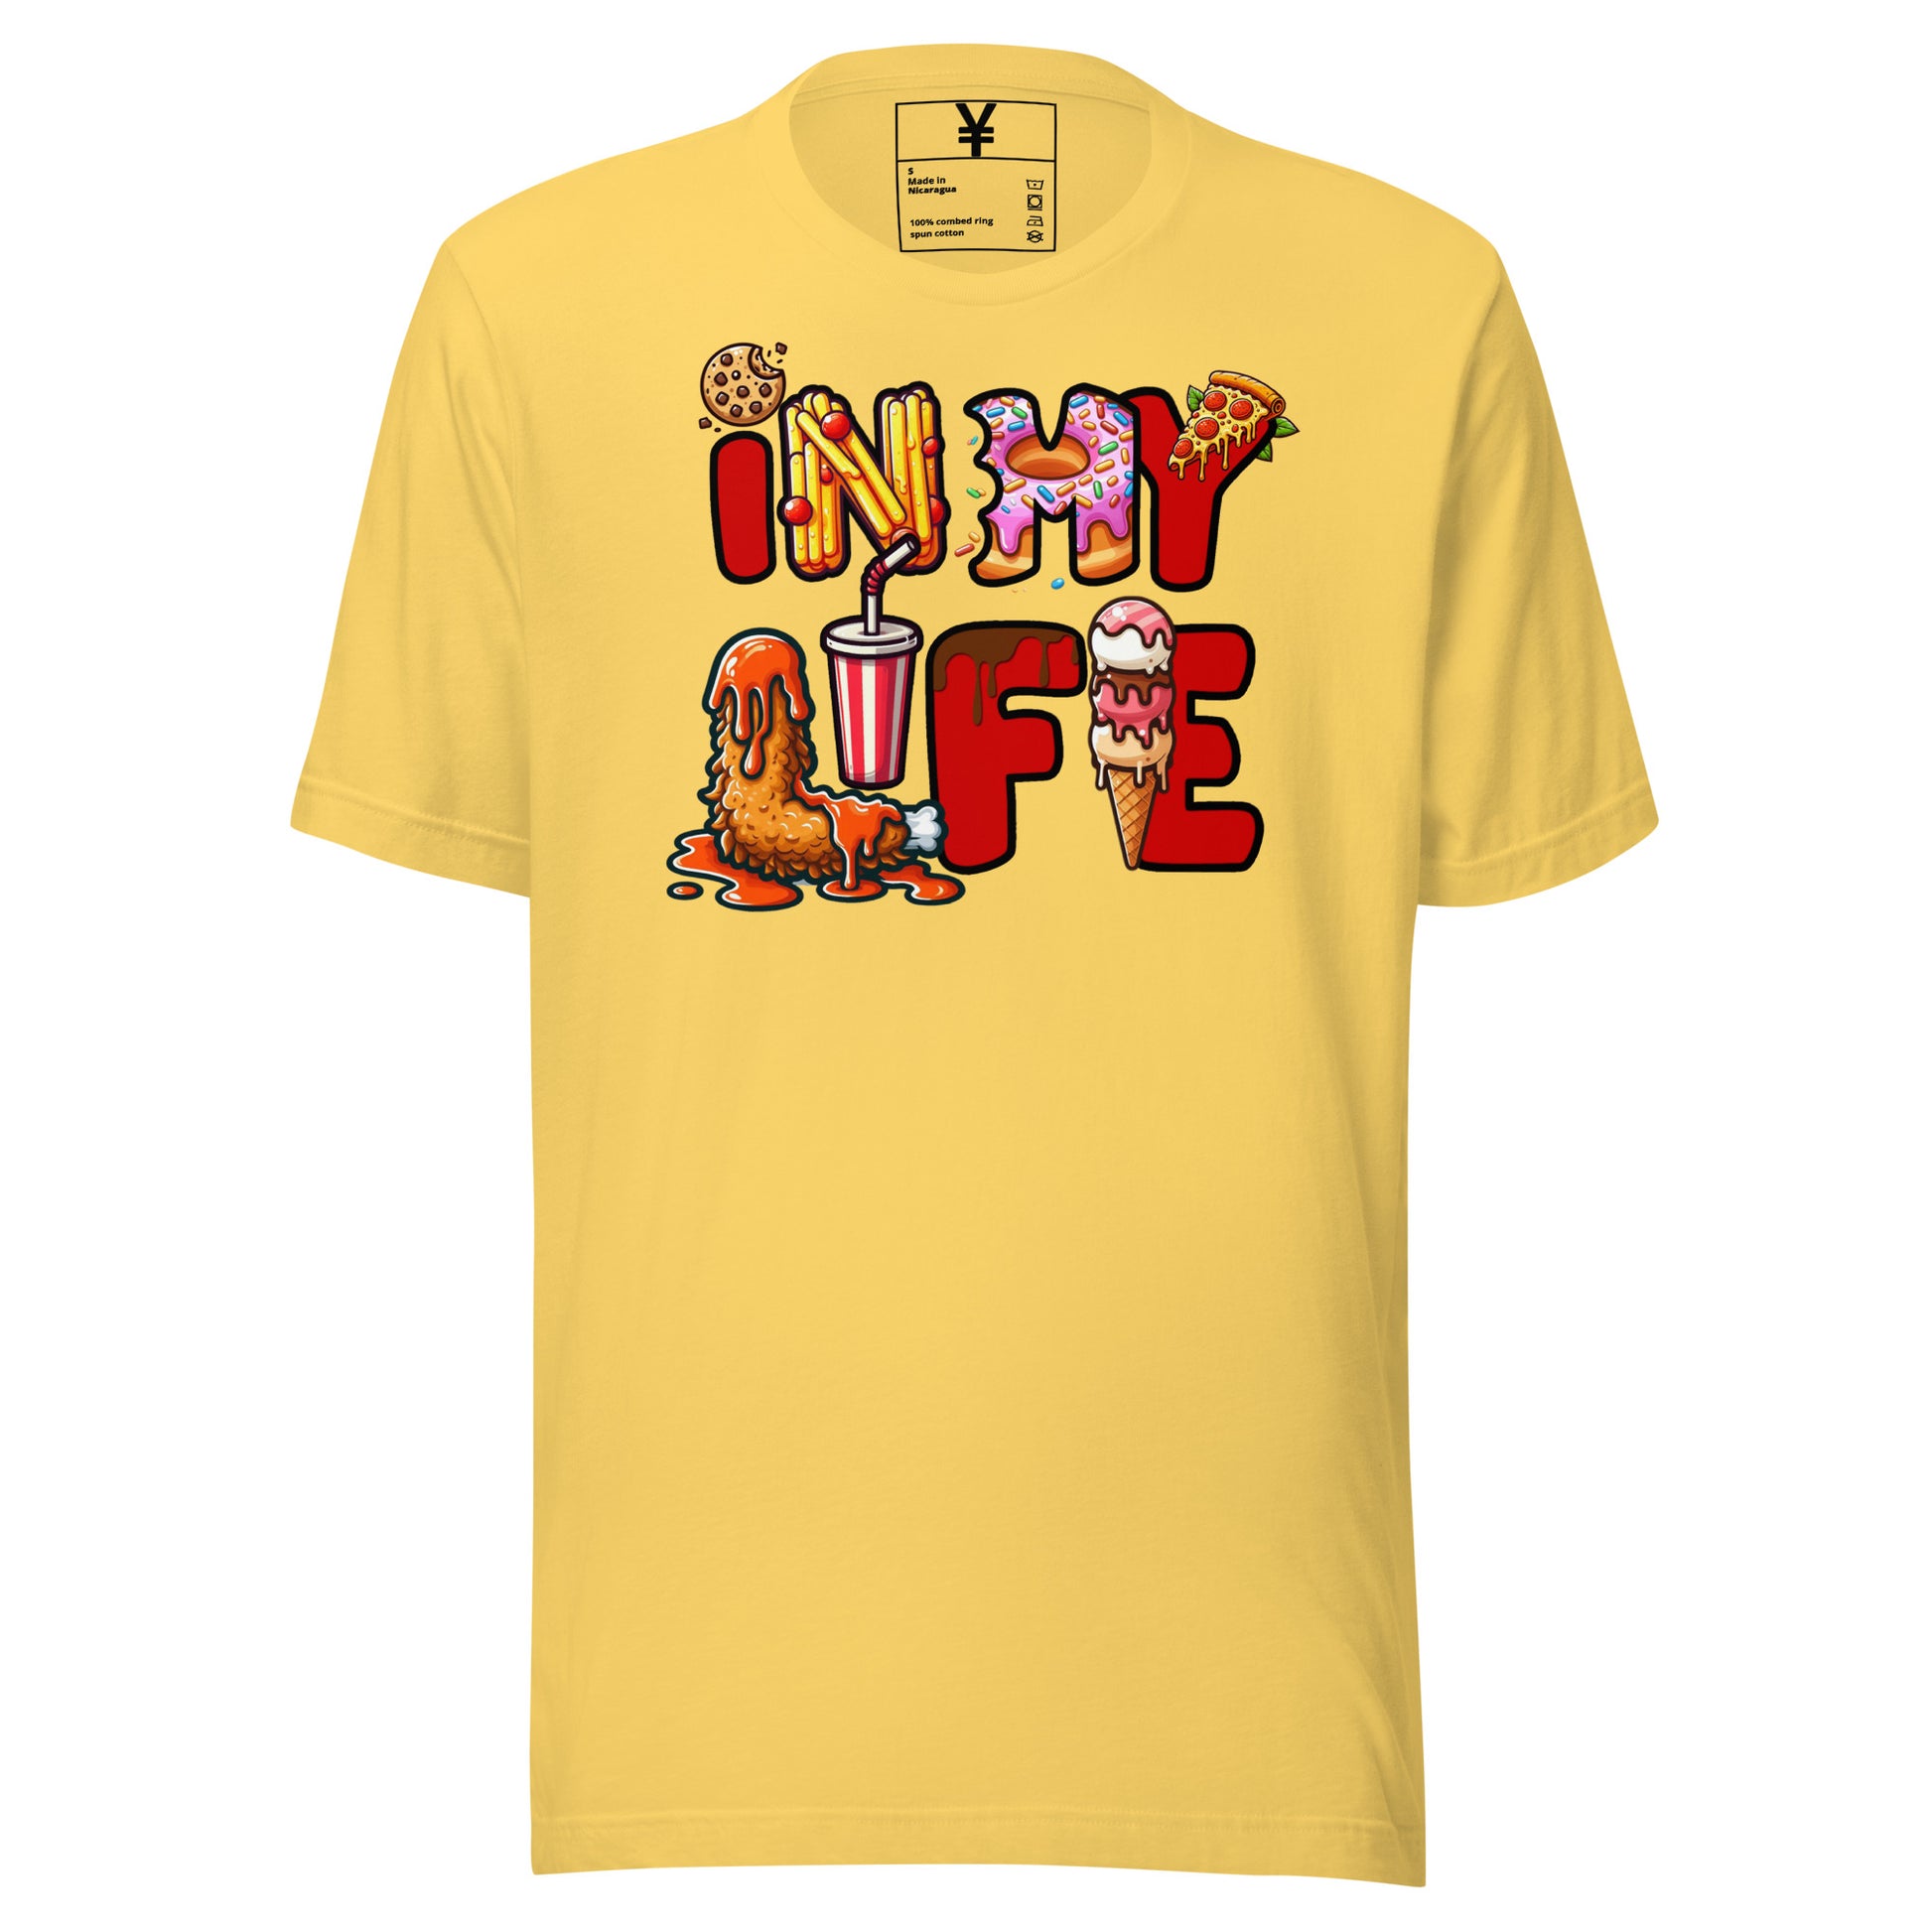 IN MY LIFE Tee – You Film Me TV